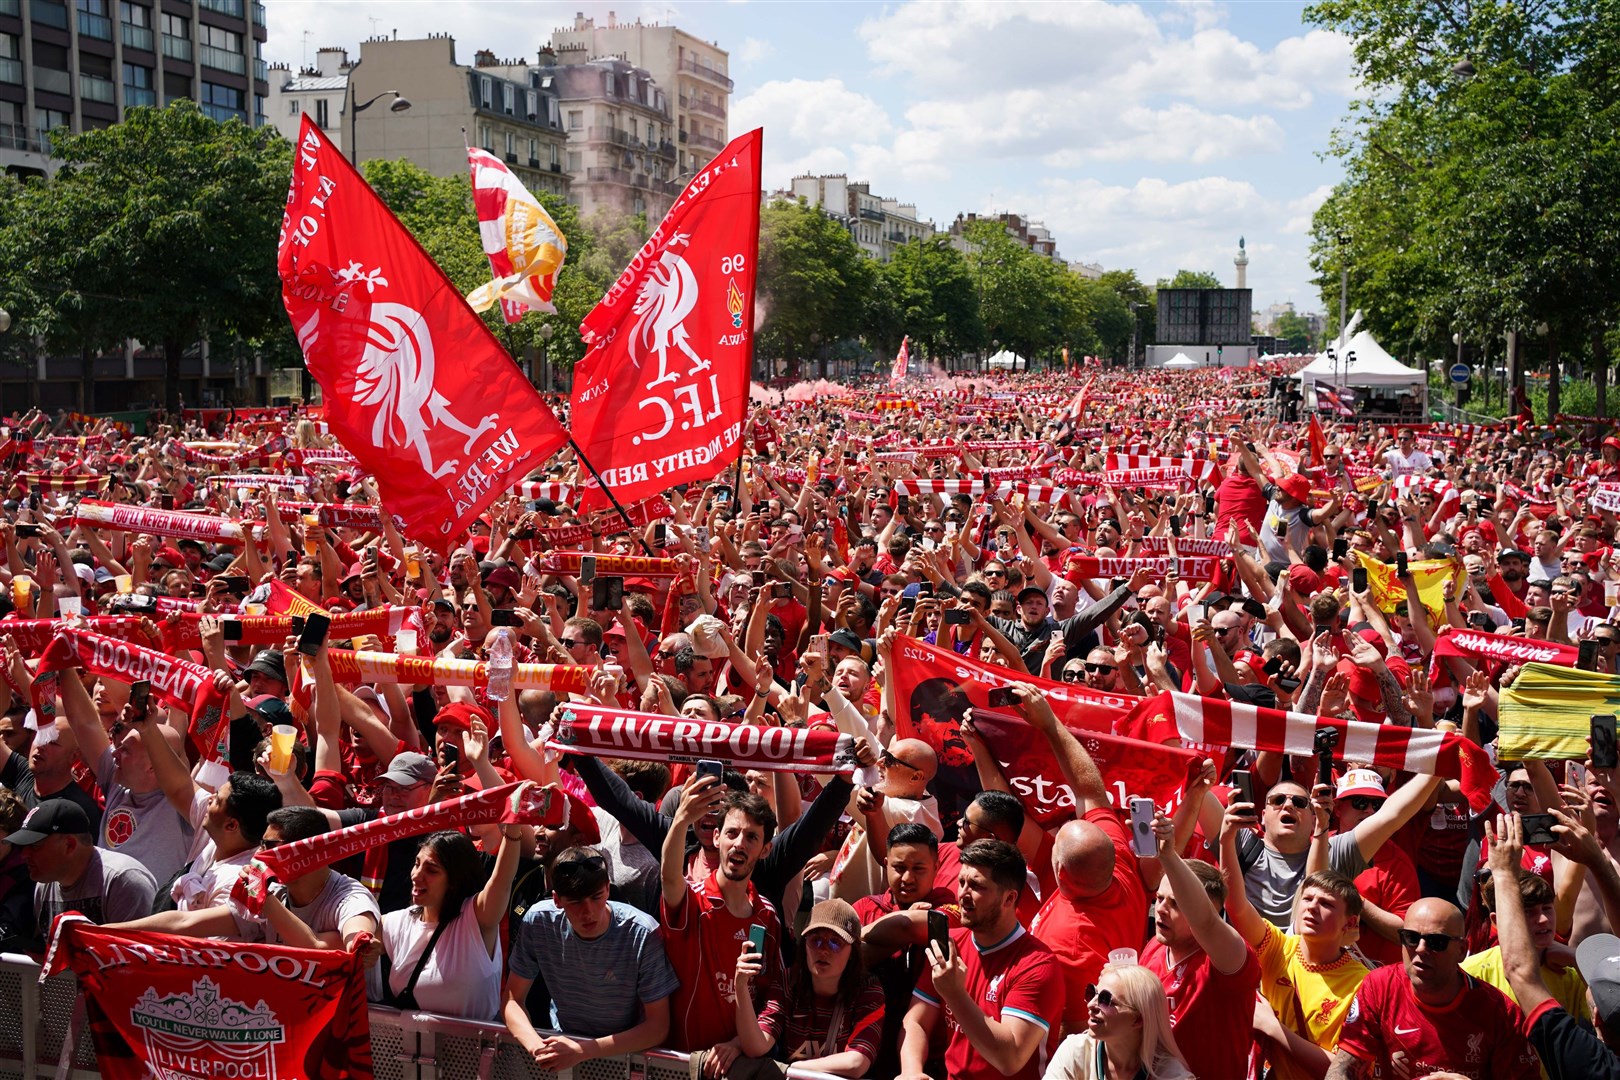 Thousands of Liverpool supporters in a fan zone in Paris (Jacob King/PA)